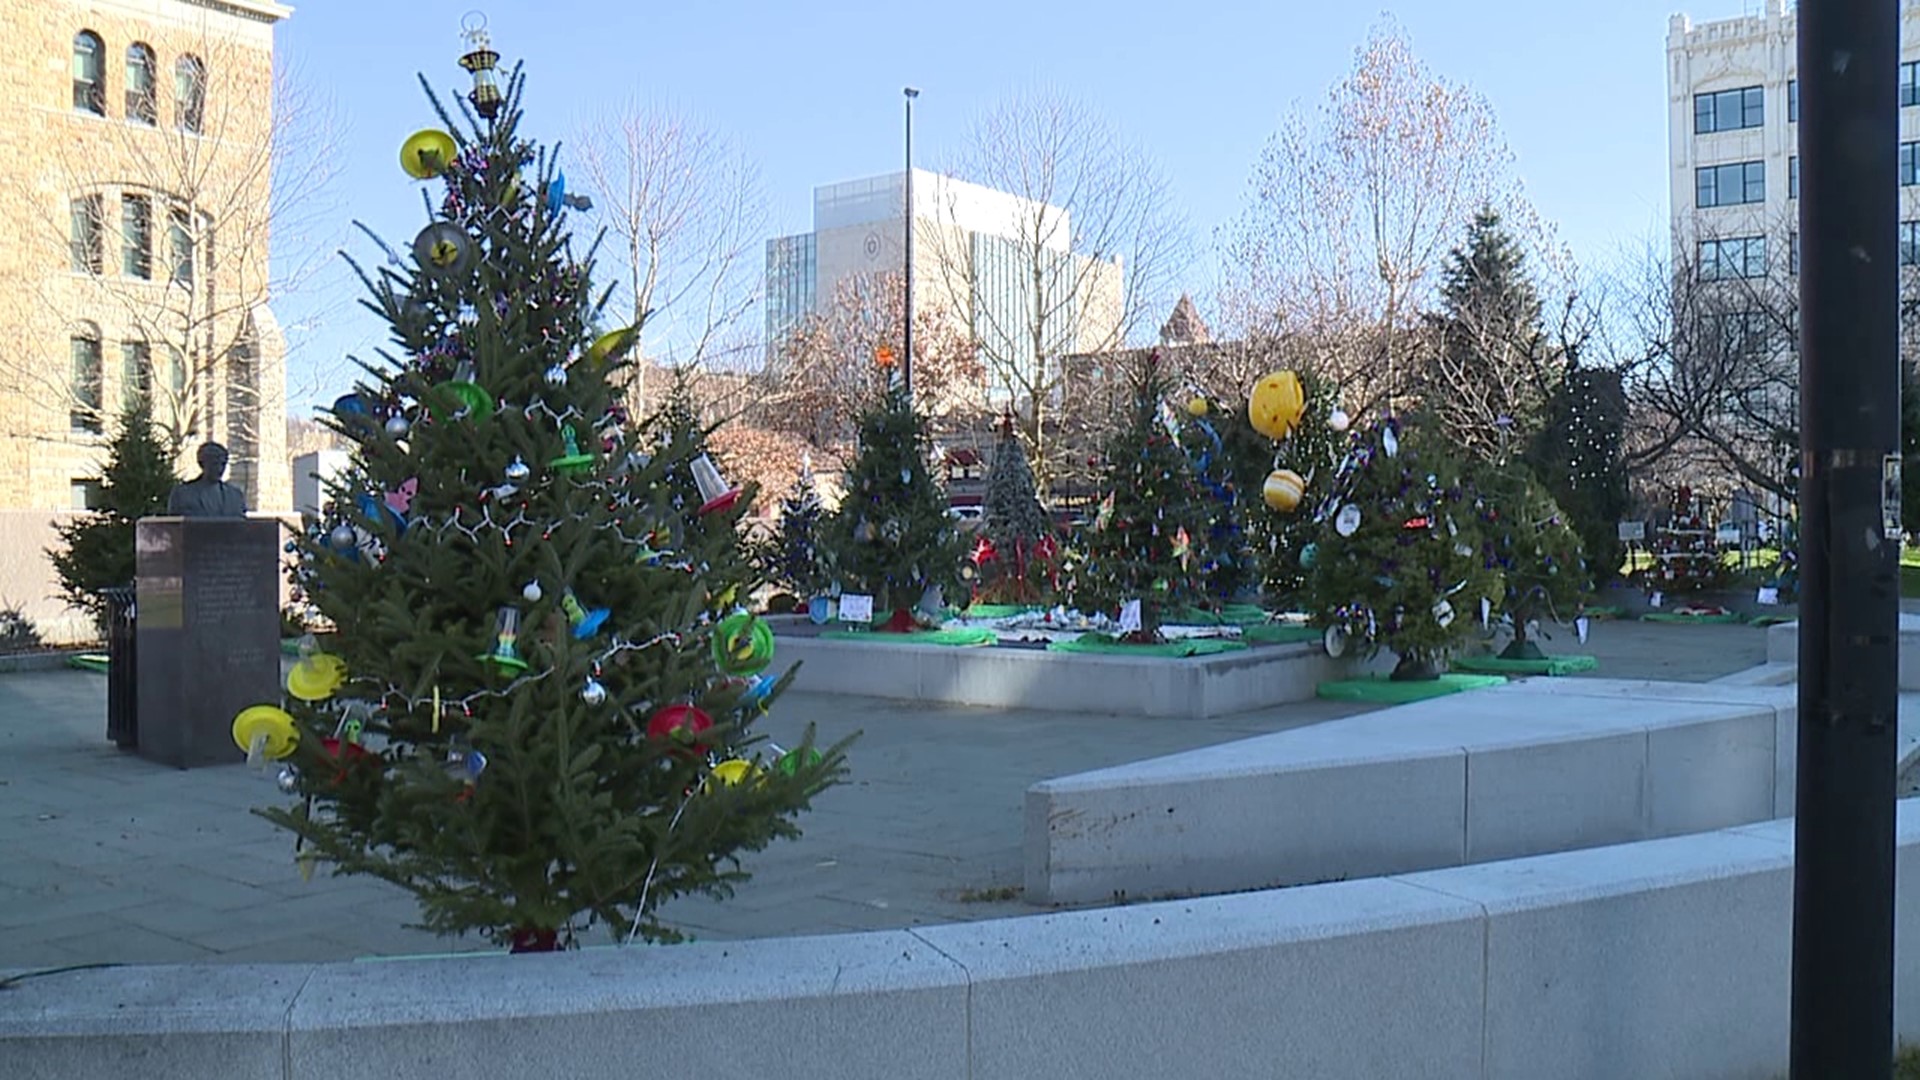 A holiday market is welcoming shoppers this weekend on courthouse square in Scranton.